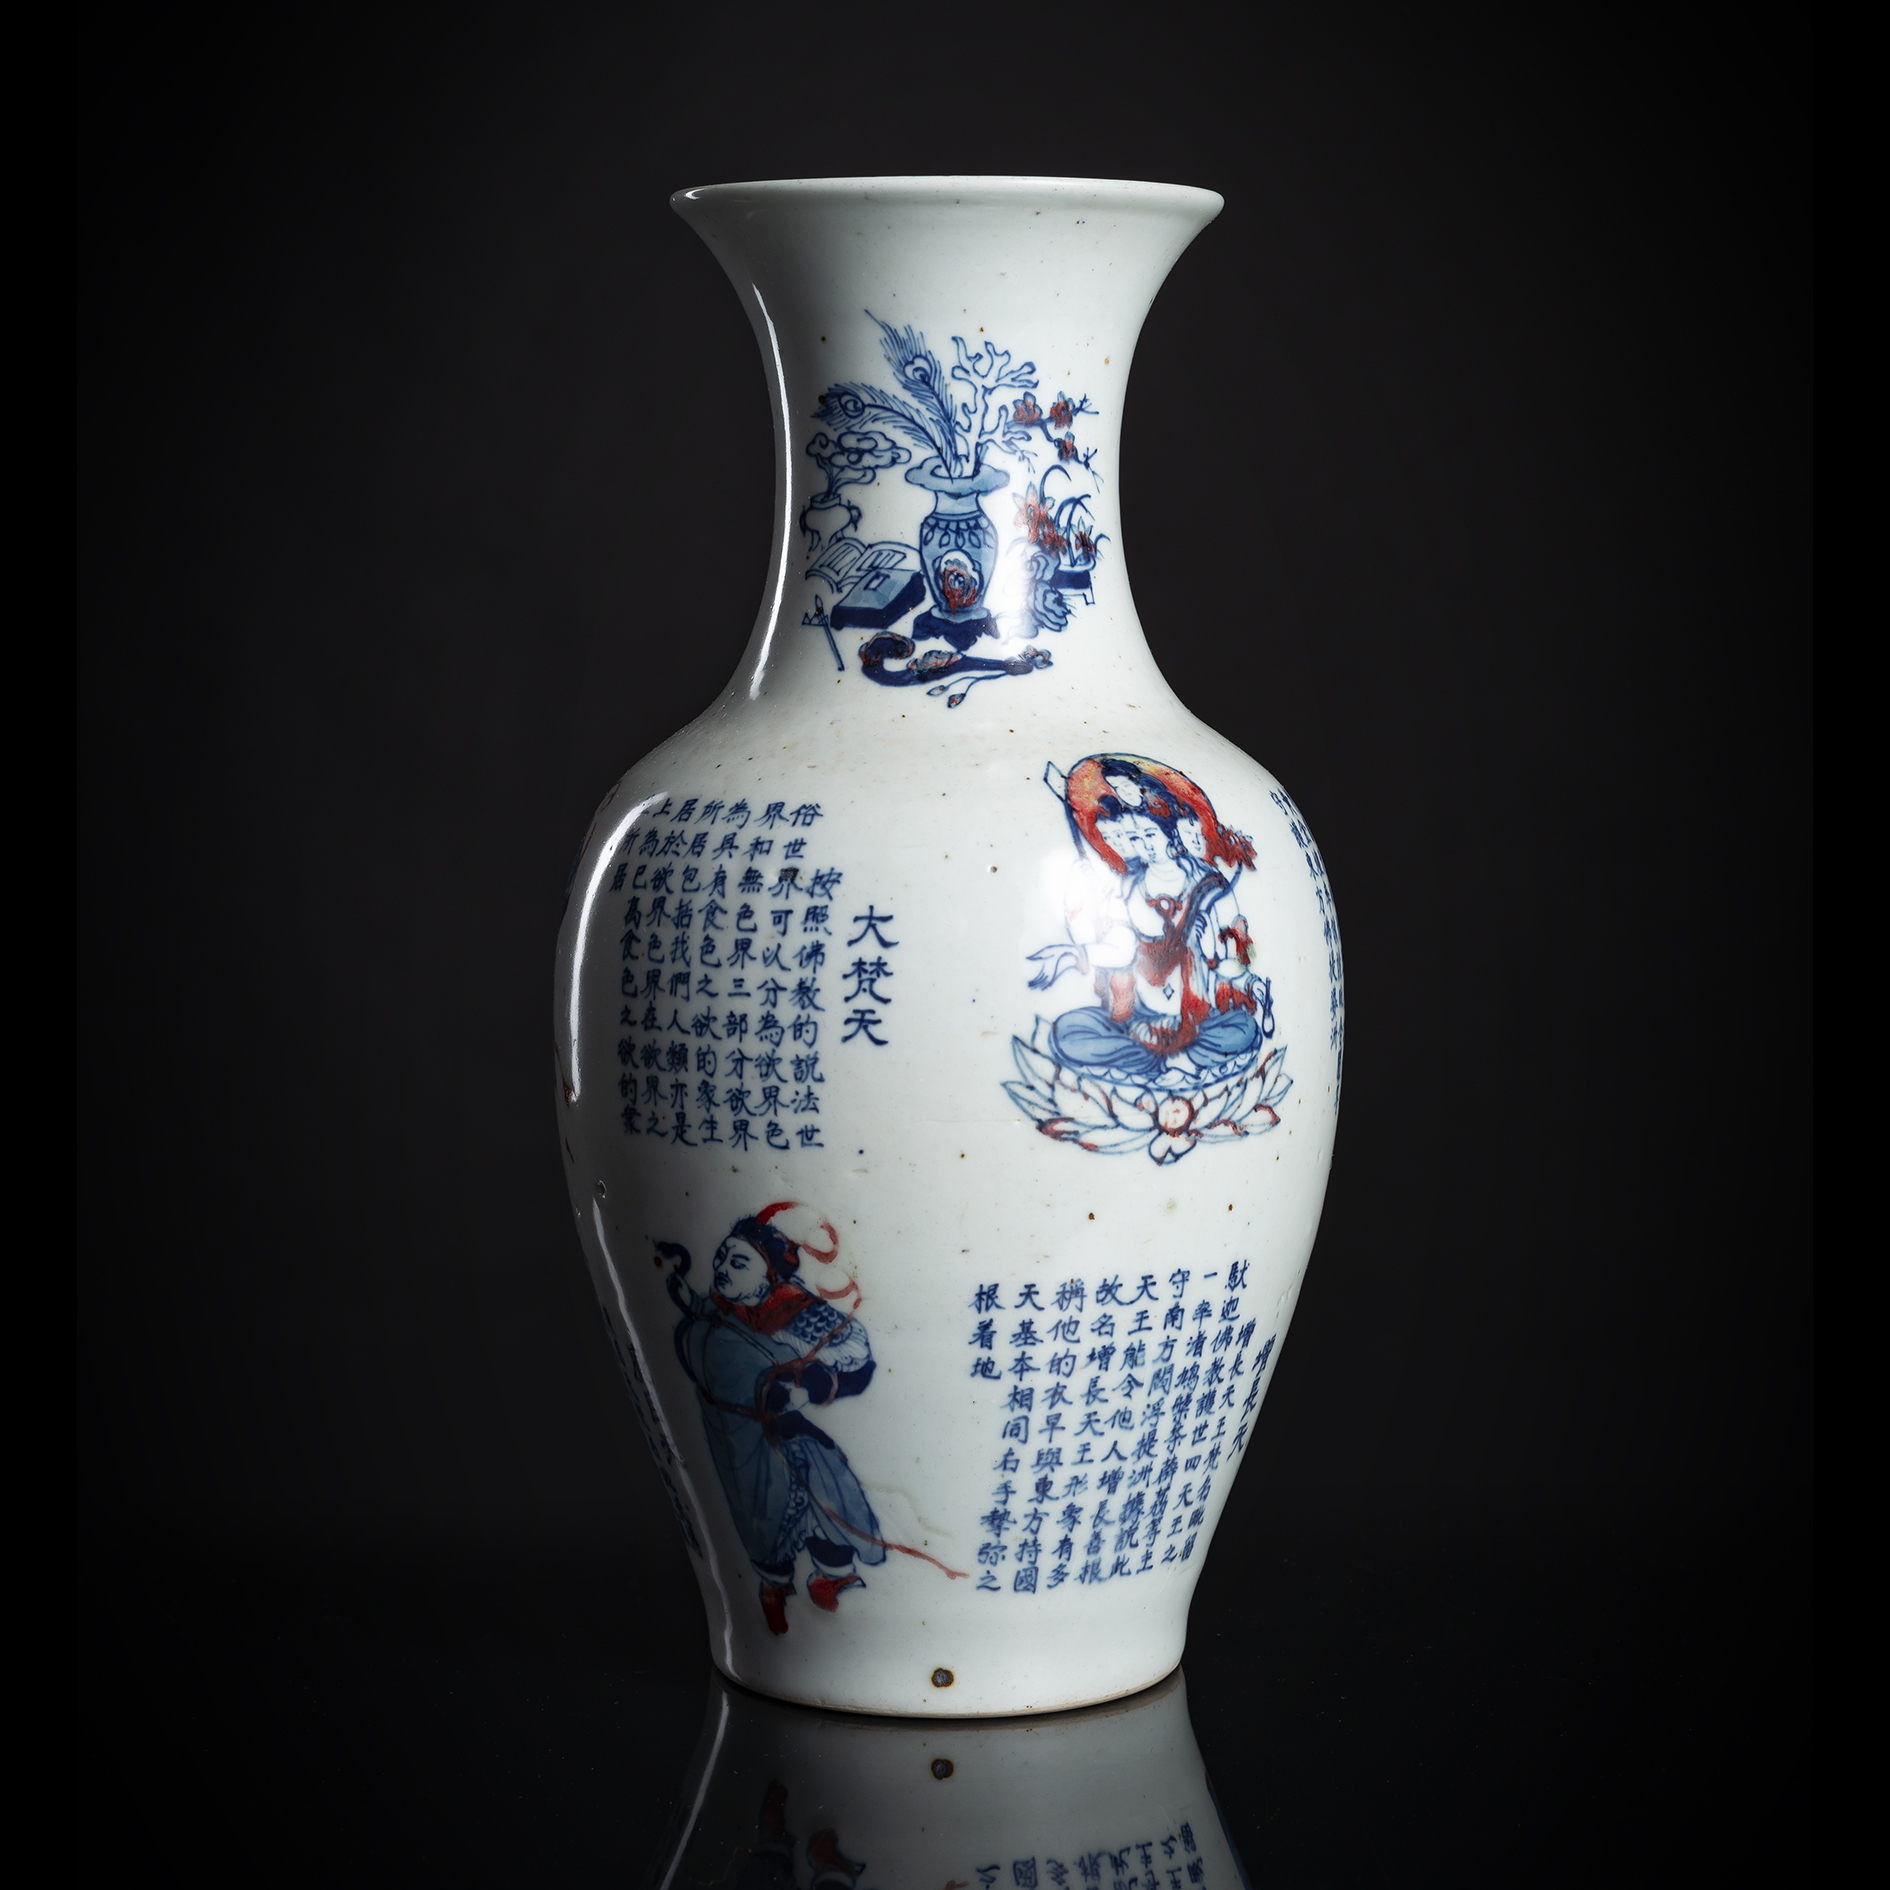 A BLUE AND WHITE AND COPPER RED DECORATED PORCELAIN VASE WITH INSCRIBED MYTHOLOGICAL FIGURES